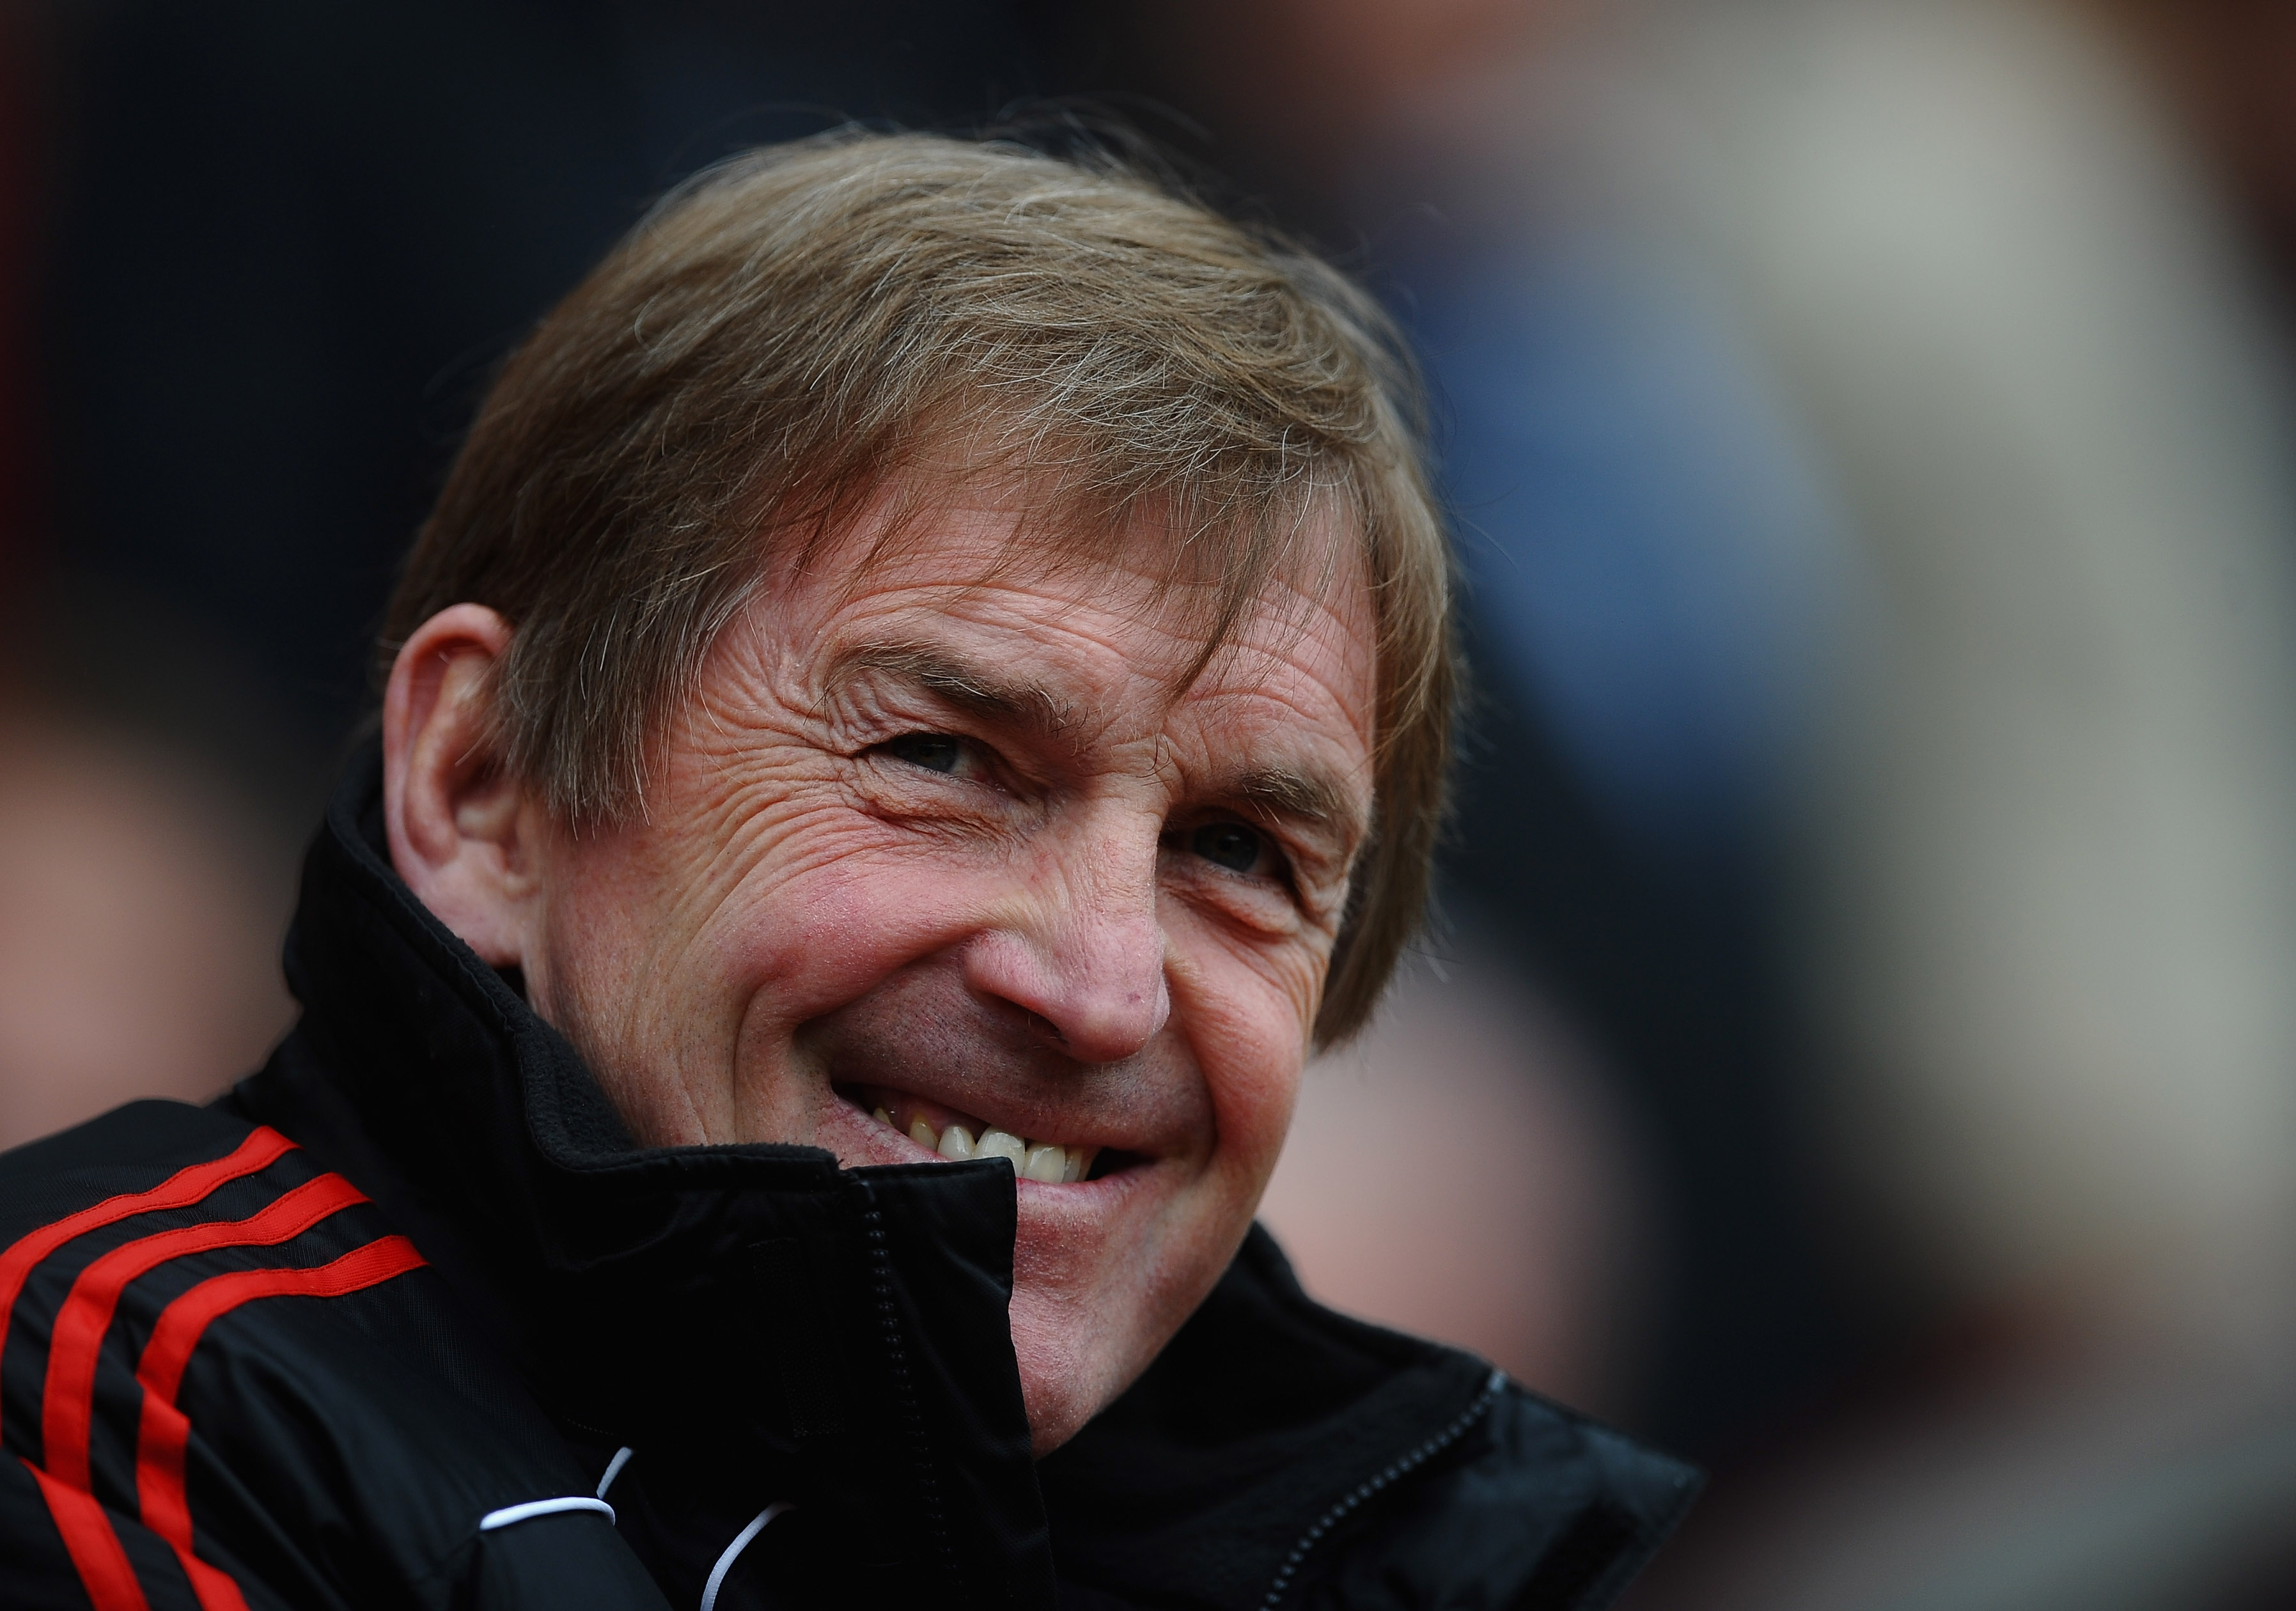 SUNDERLAND, ENGLAND - MARCH 20:  Kenny Dalglish of Liverpool looks on during the Barclays Premier League match between Sunderland and Liverpool at the Stadium of Light on March 20, 2011 in Sunderland, England.  (Photo by Laurence Griffiths/Getty Images)